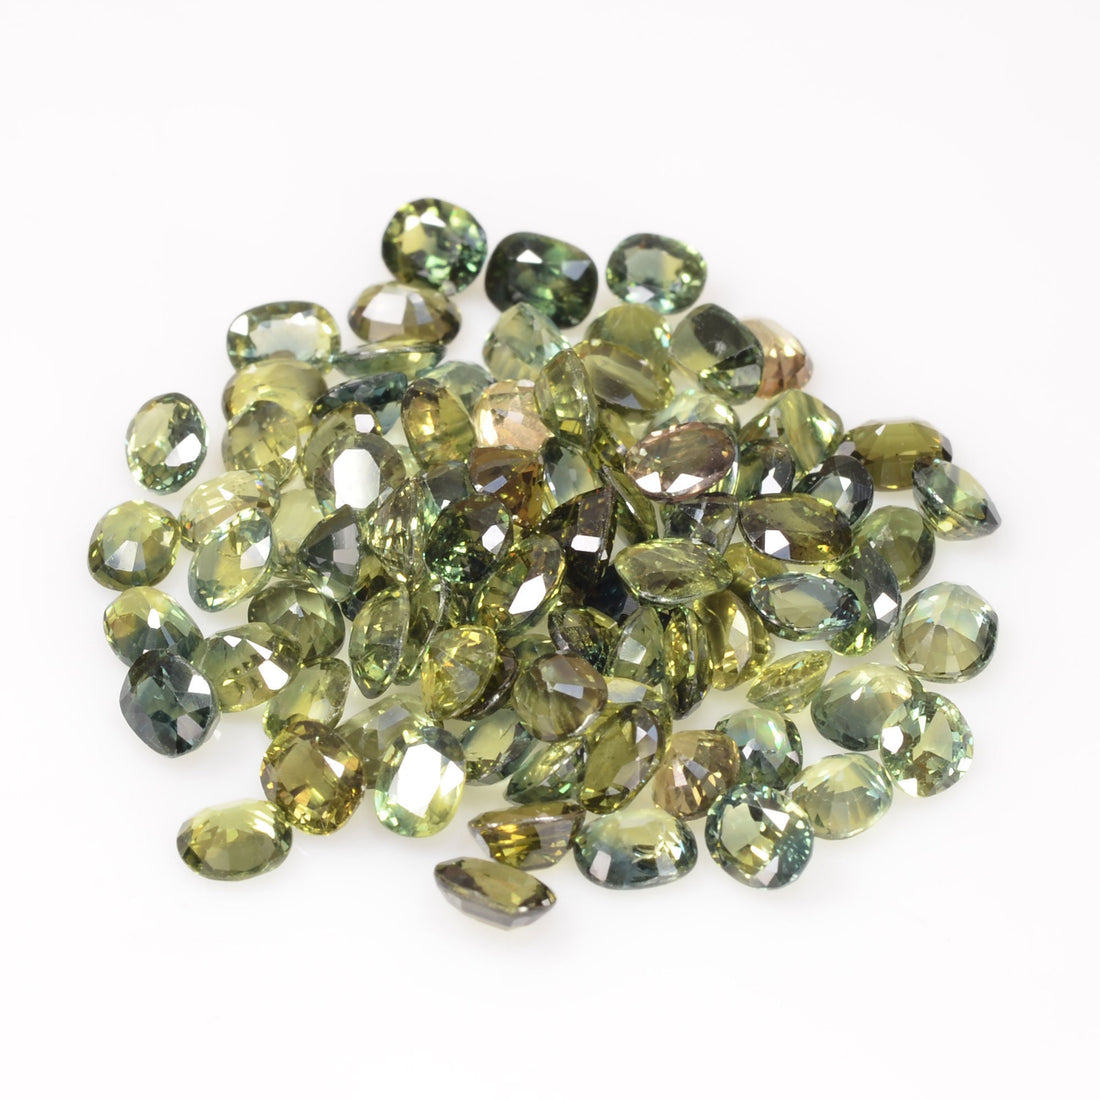 5x4 mm Natural Calibrated Green Sapphire Loose Gemstone Oval Cut